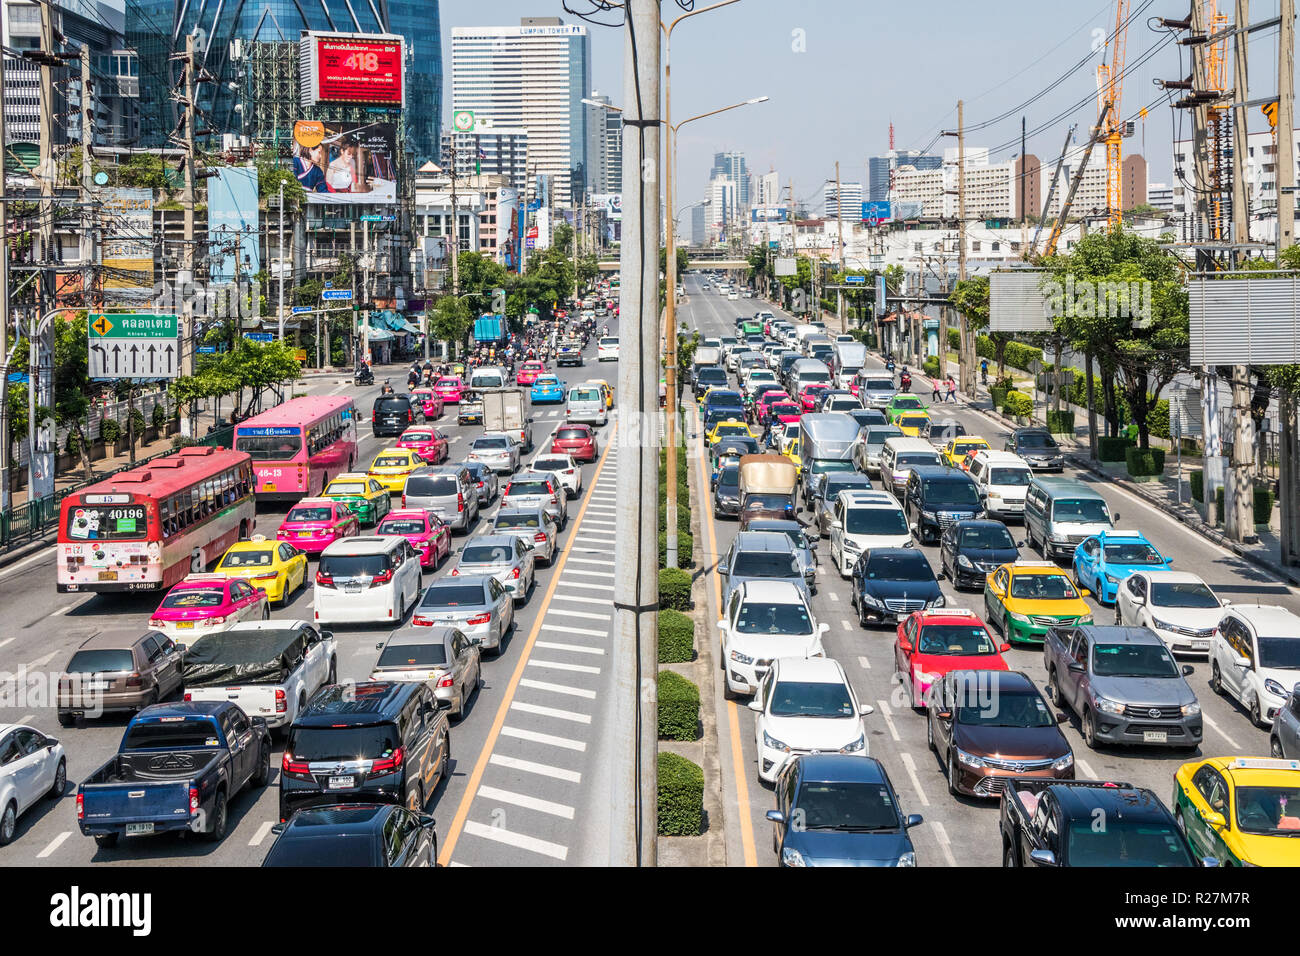 Bangkok, Thailand - 4th October 2018: Traffic on Rama IV road, This is one of the citys major arteries. Stock Photo